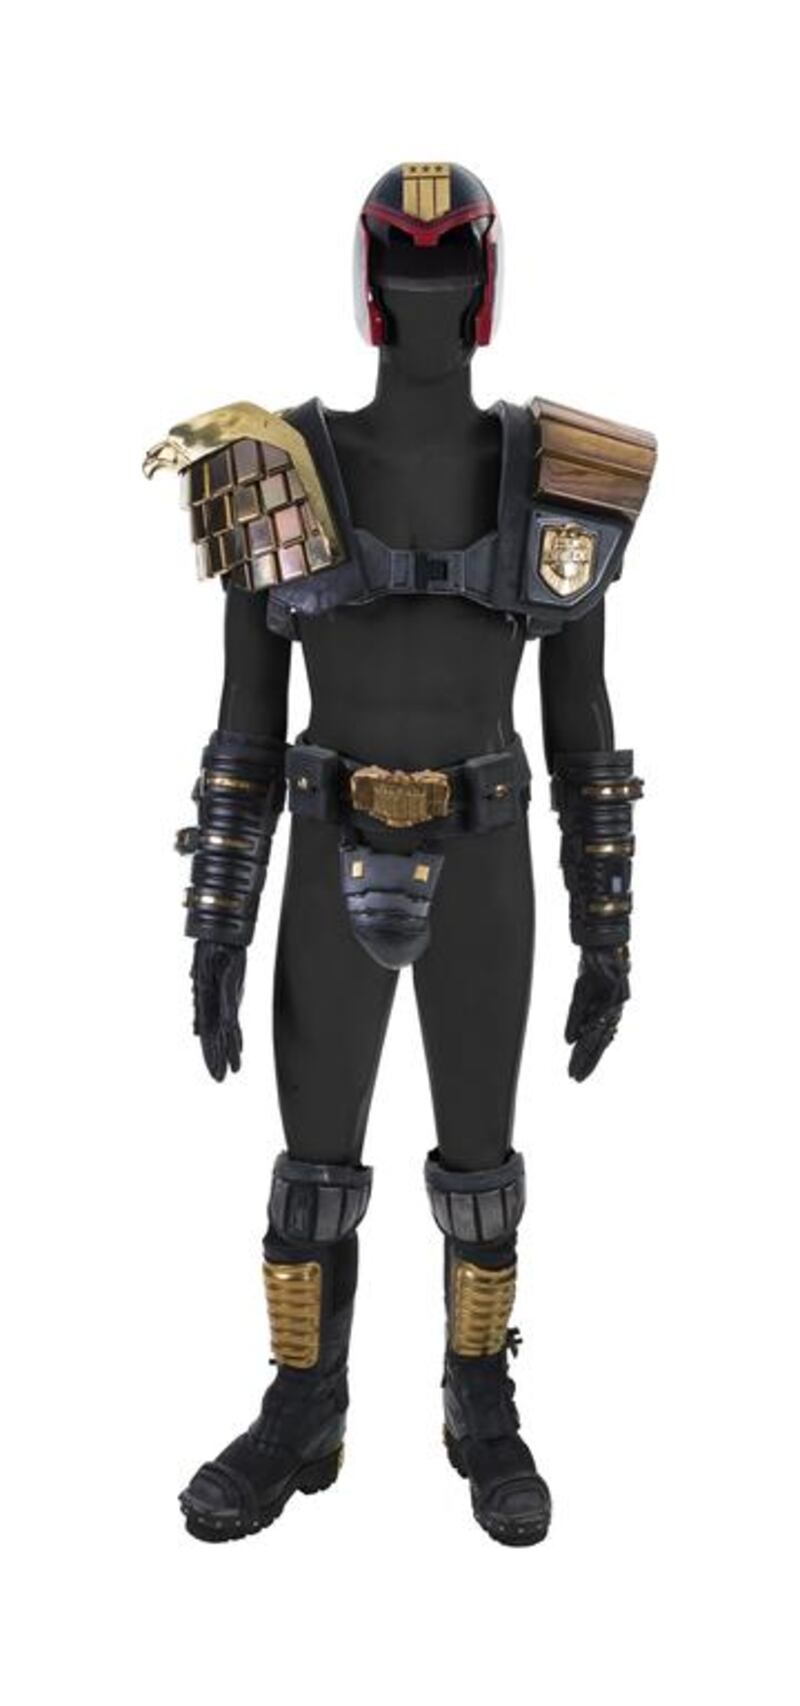 A costume Stallone wore in the 1995 film 'Judge Dredd' is another collectable on offer. Heritage Auctions via AP